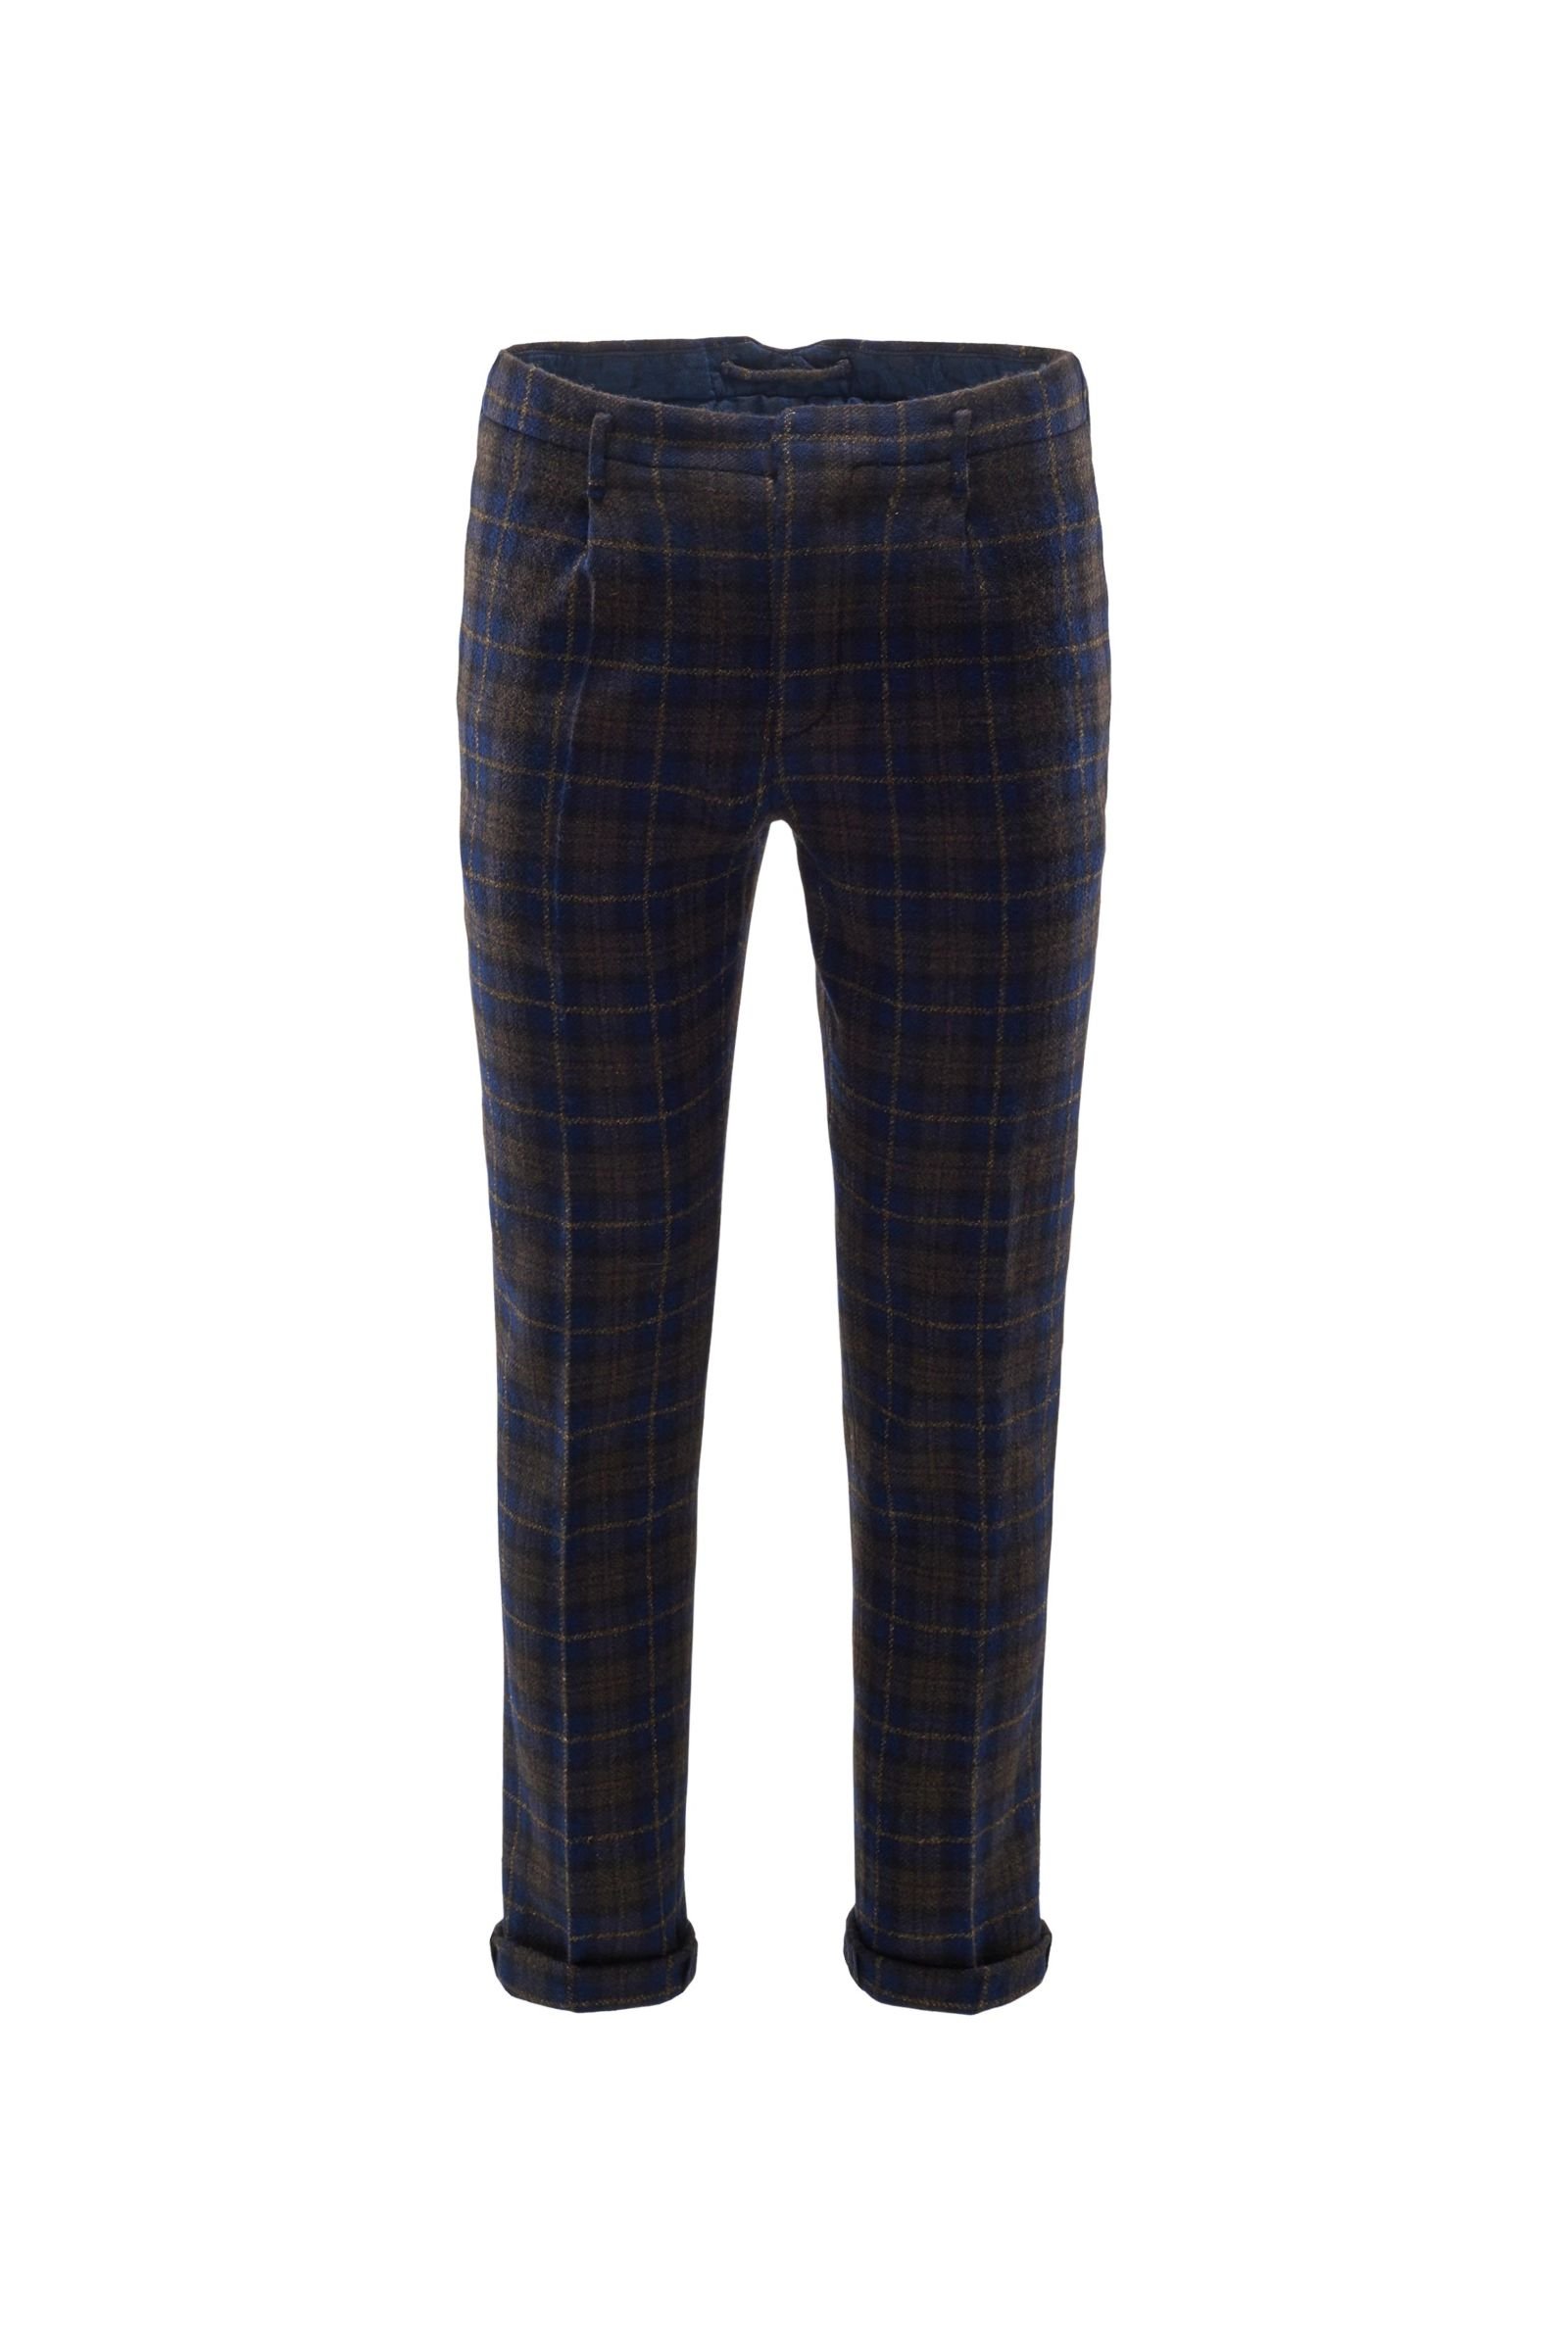 Wool trousers navy/brown checked